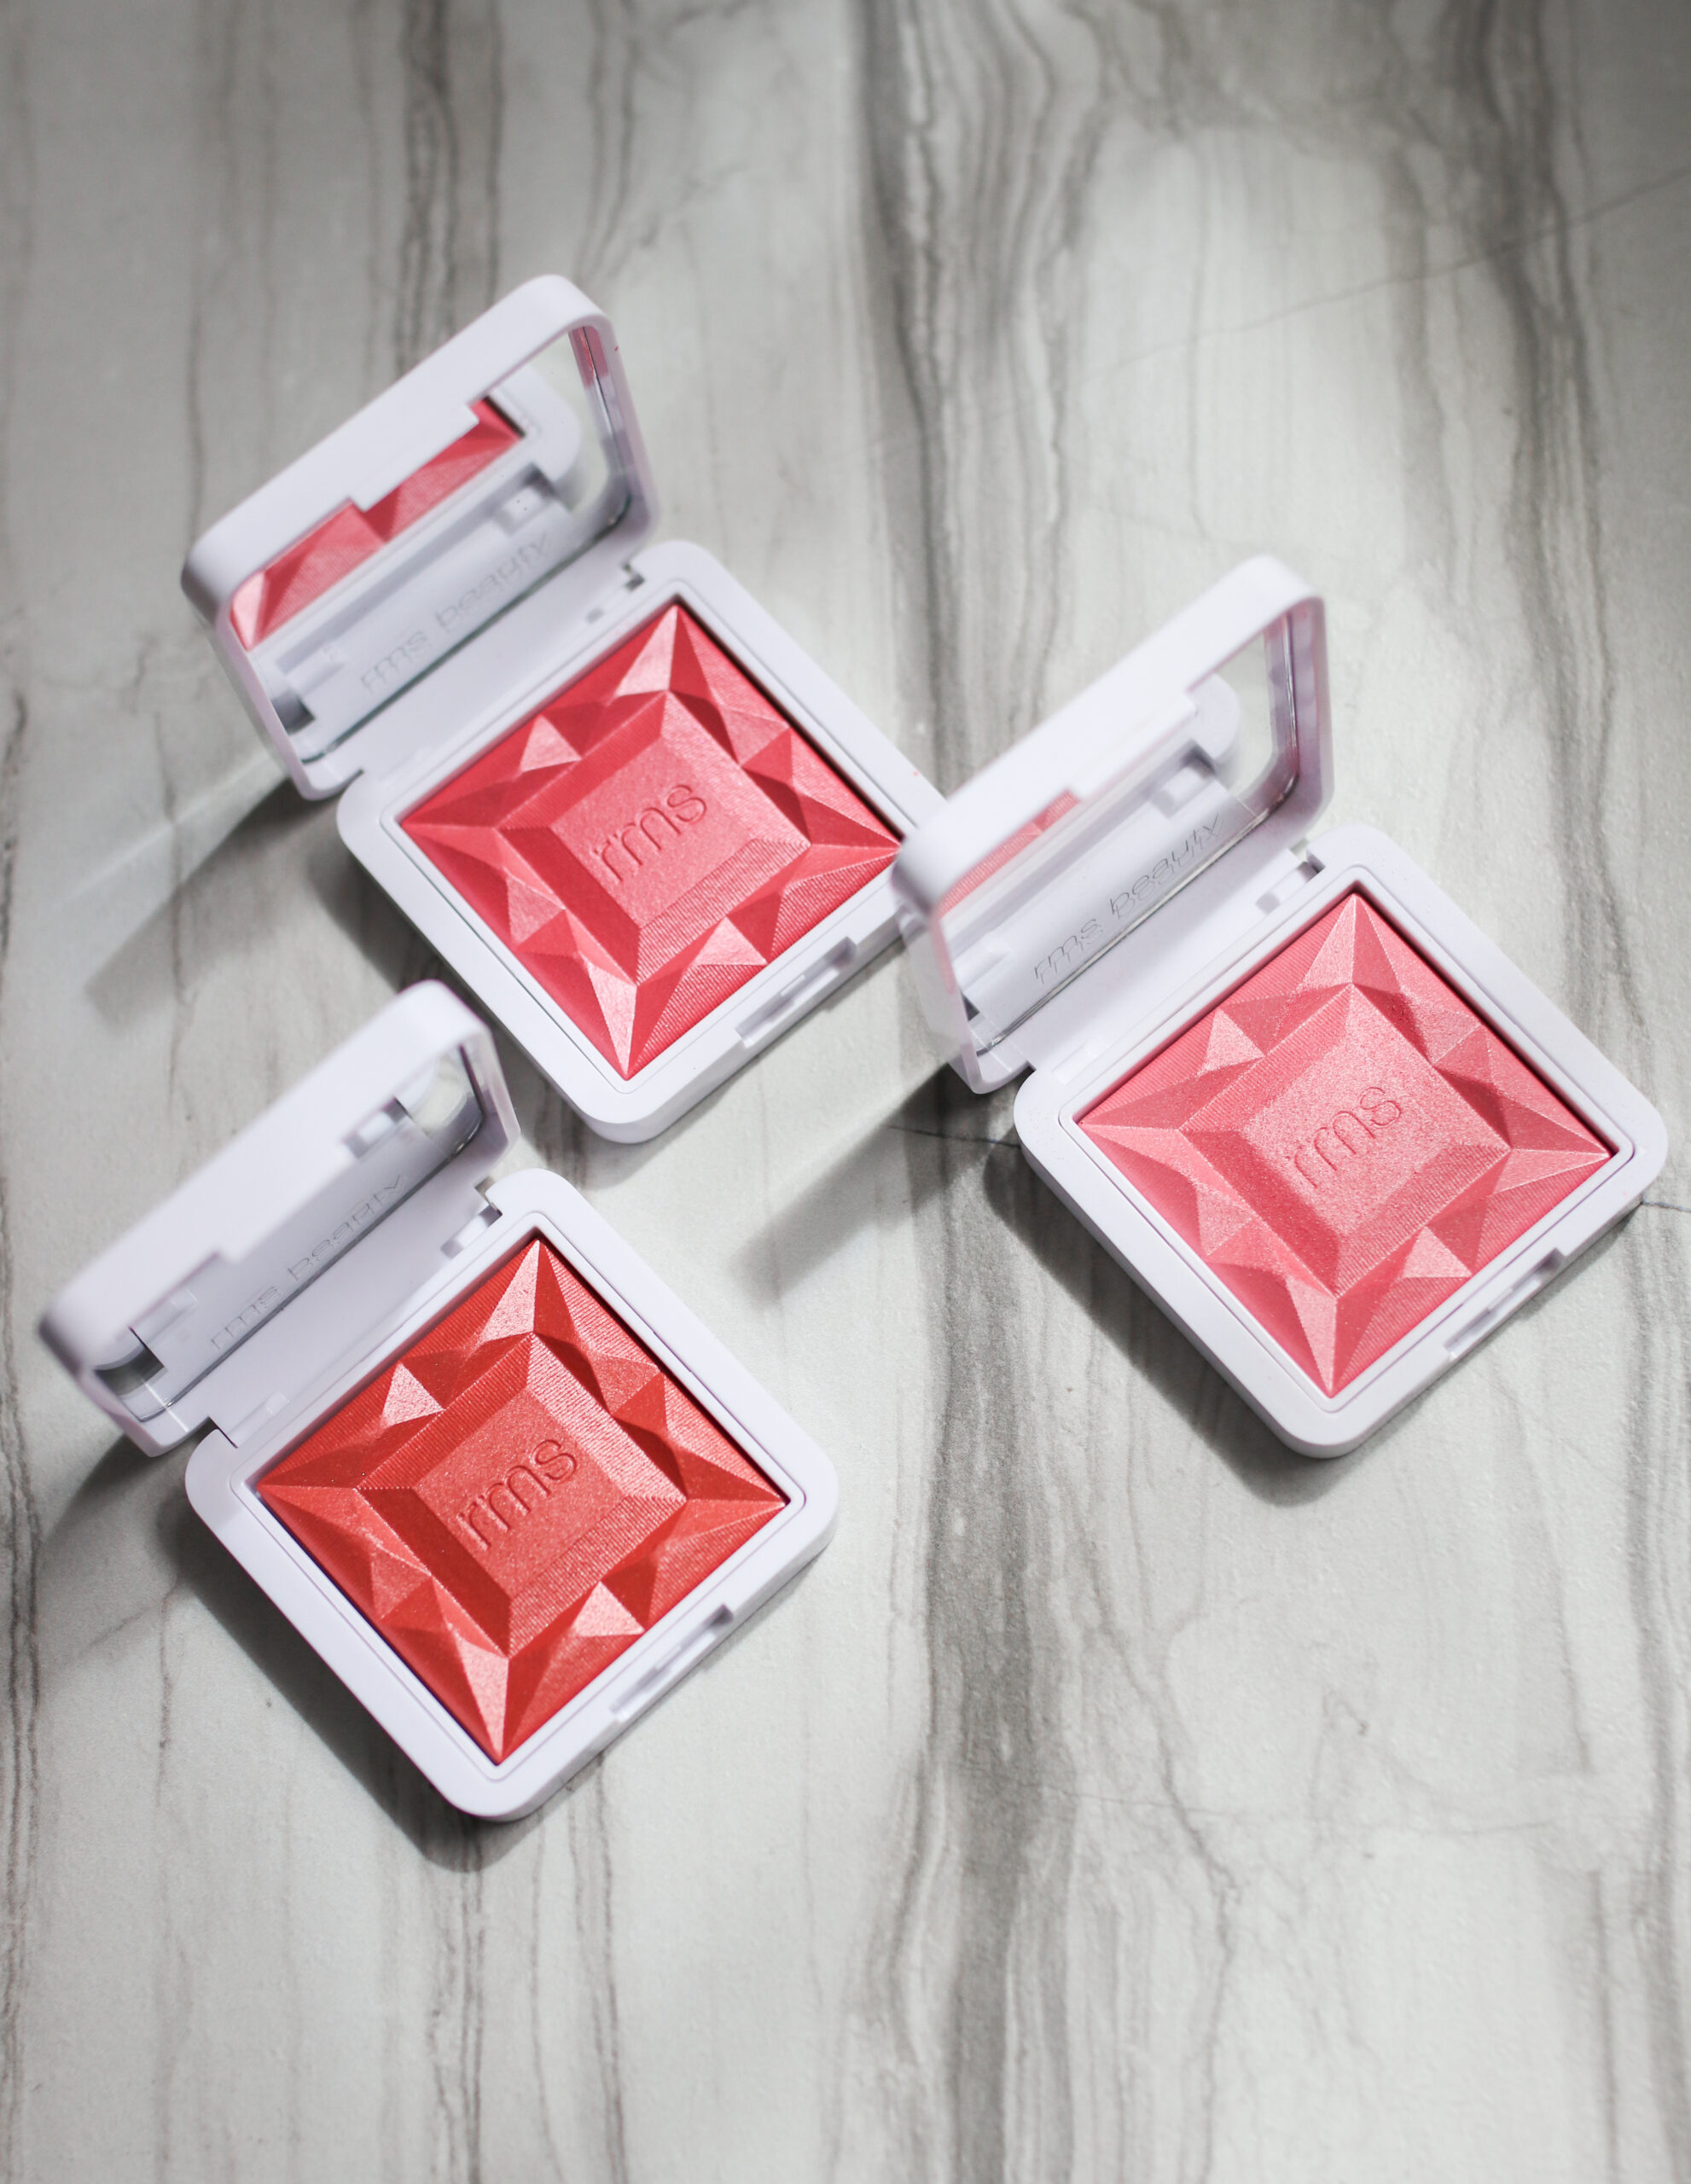 RMS Beauty ReDimension Hydra Blush review